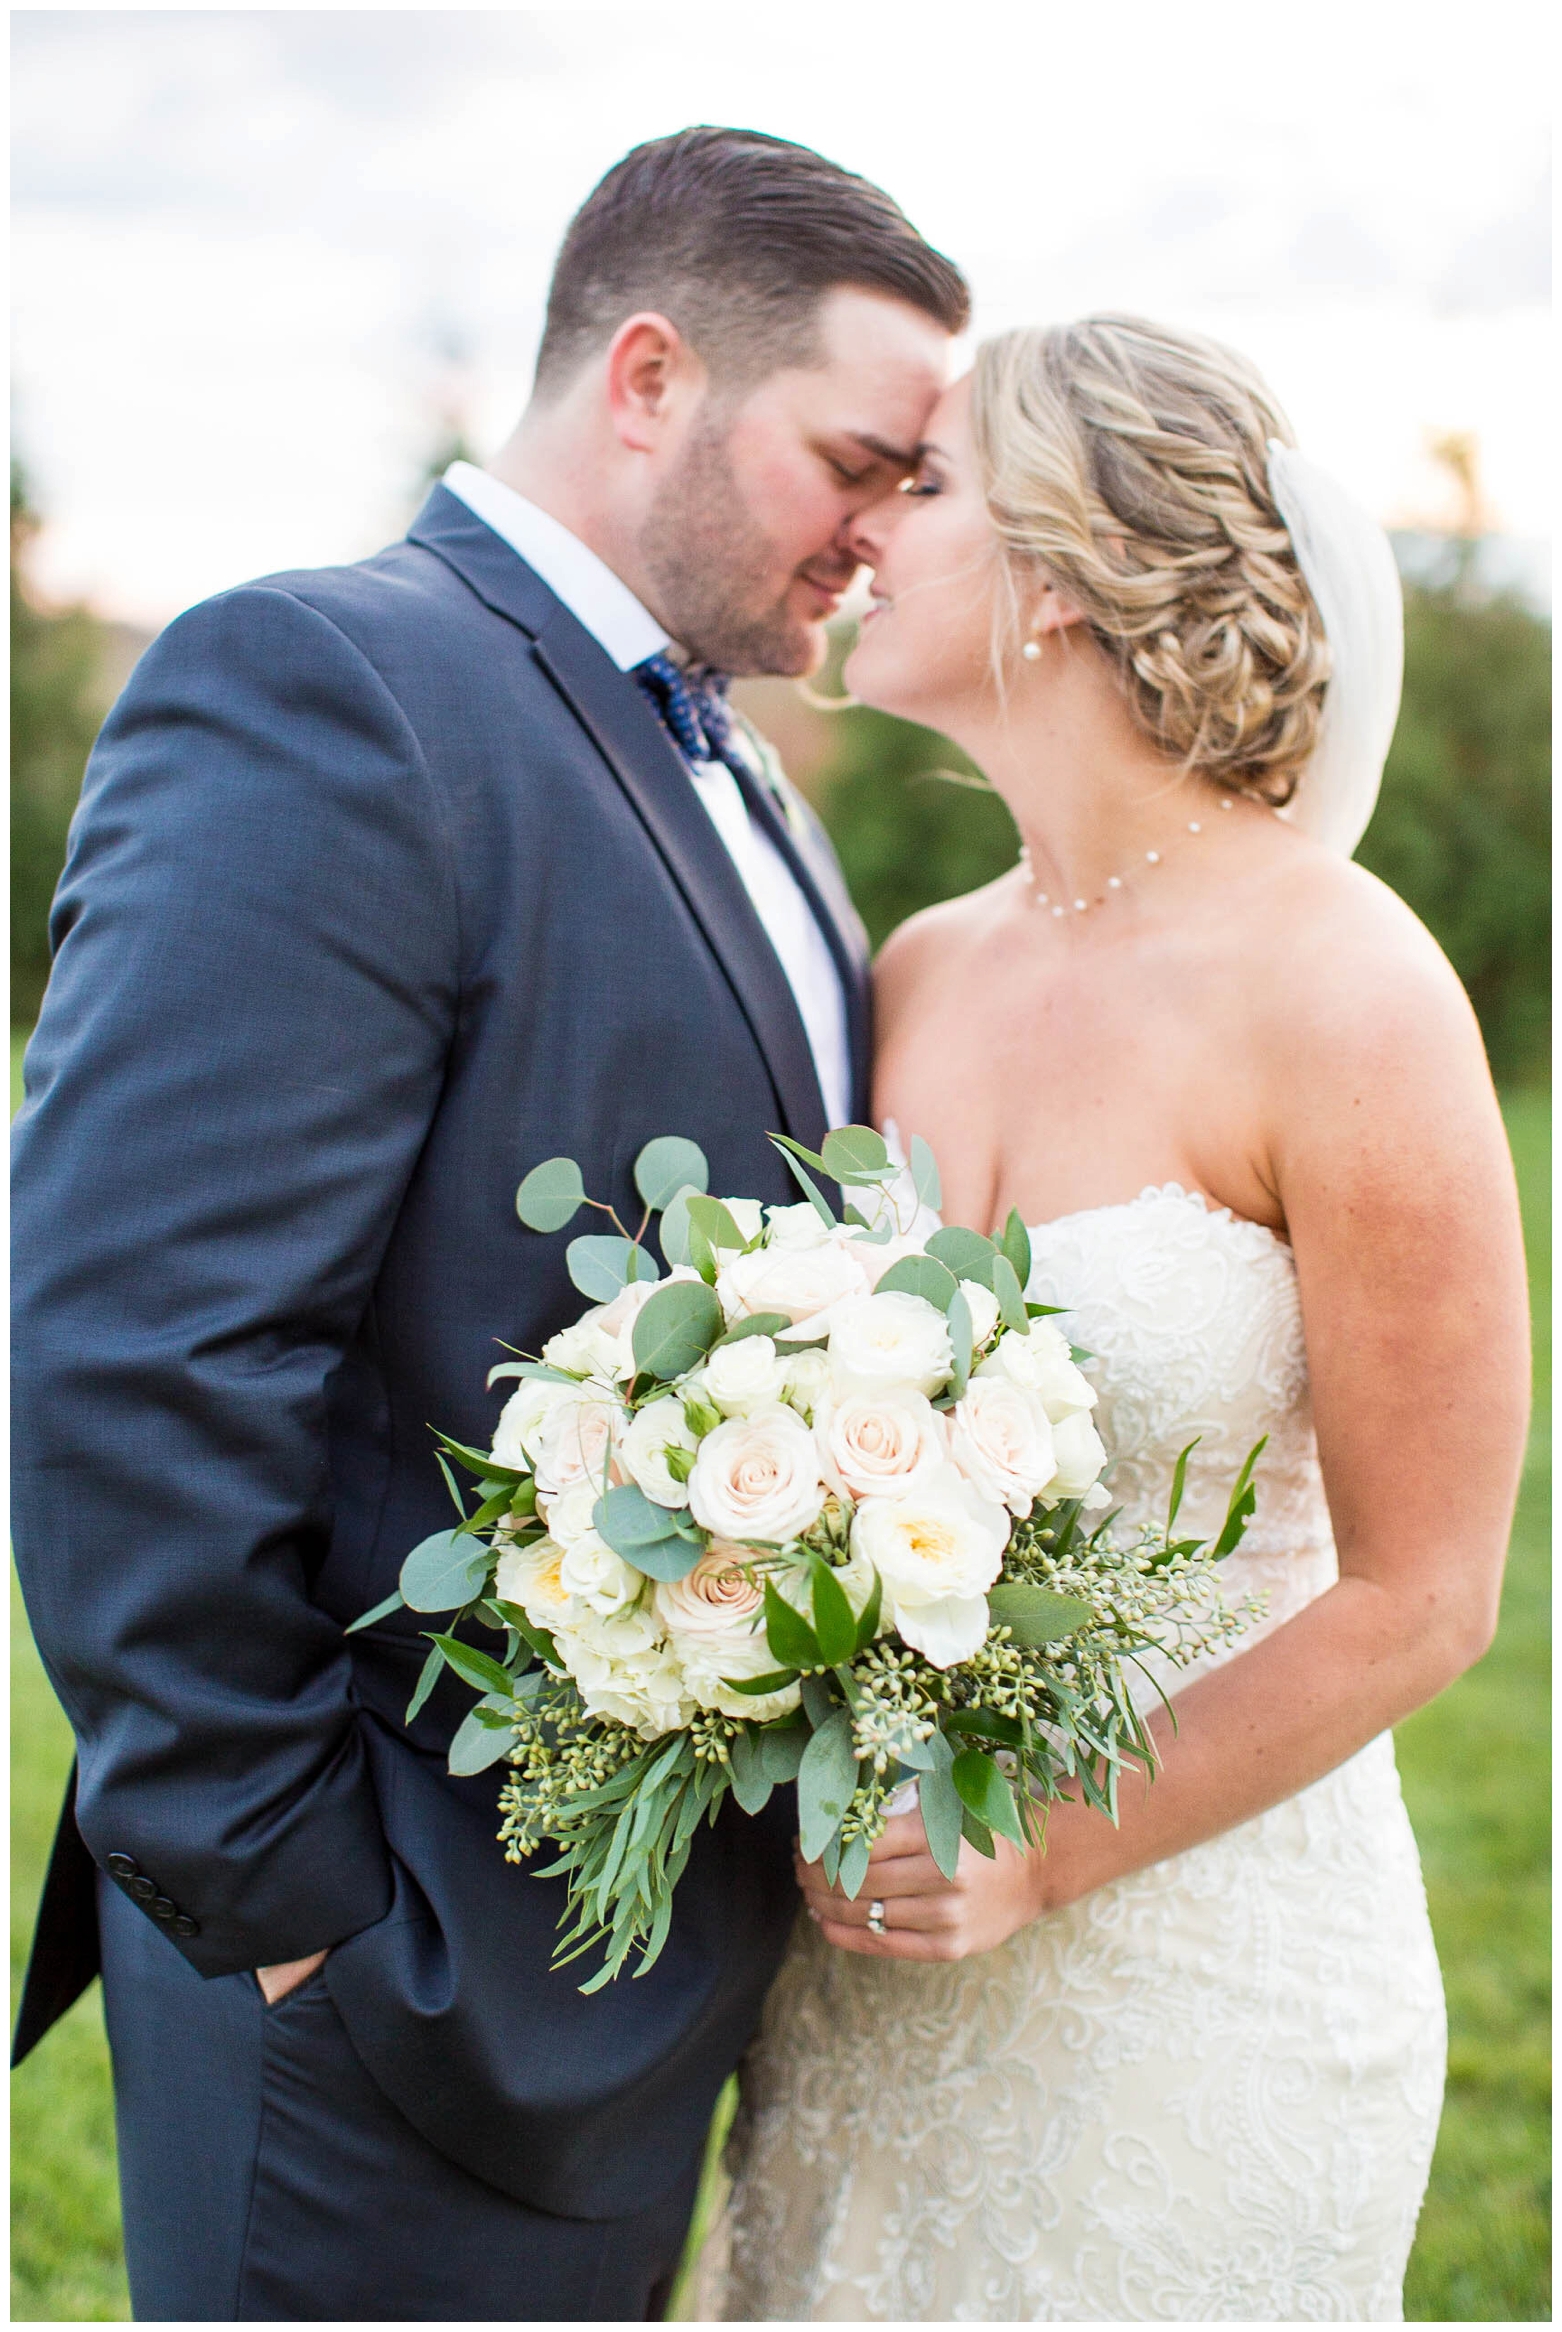 View More: http://hopetaylorphotographyphotos.pass.us/lynsay-and-brian